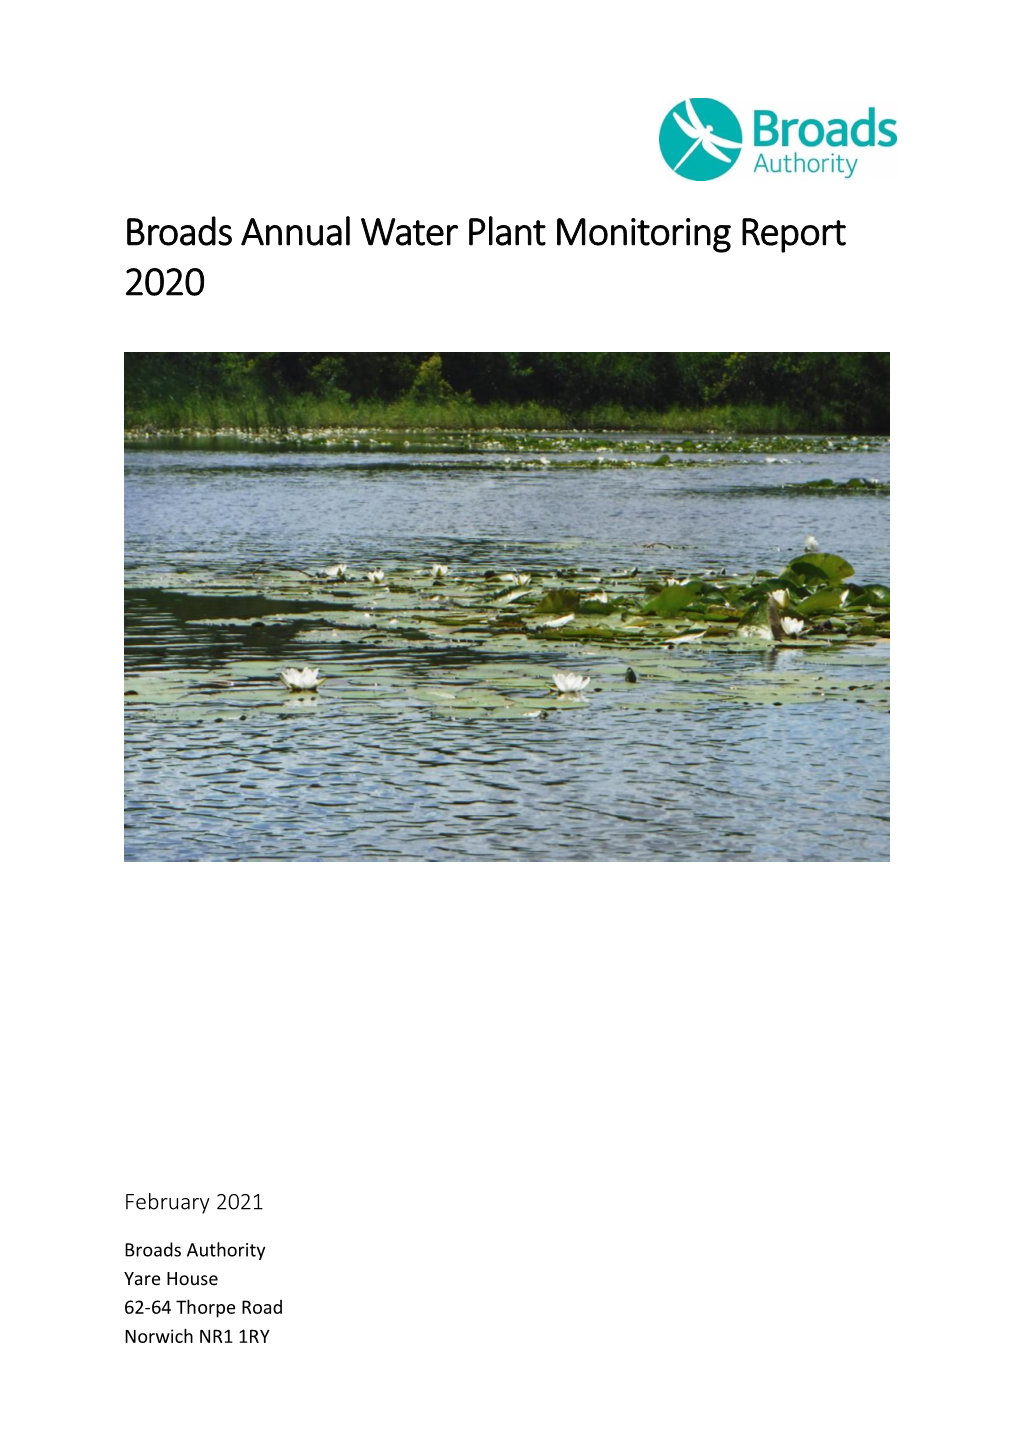 Broads Annual Water Plant Monitoring Report 2020